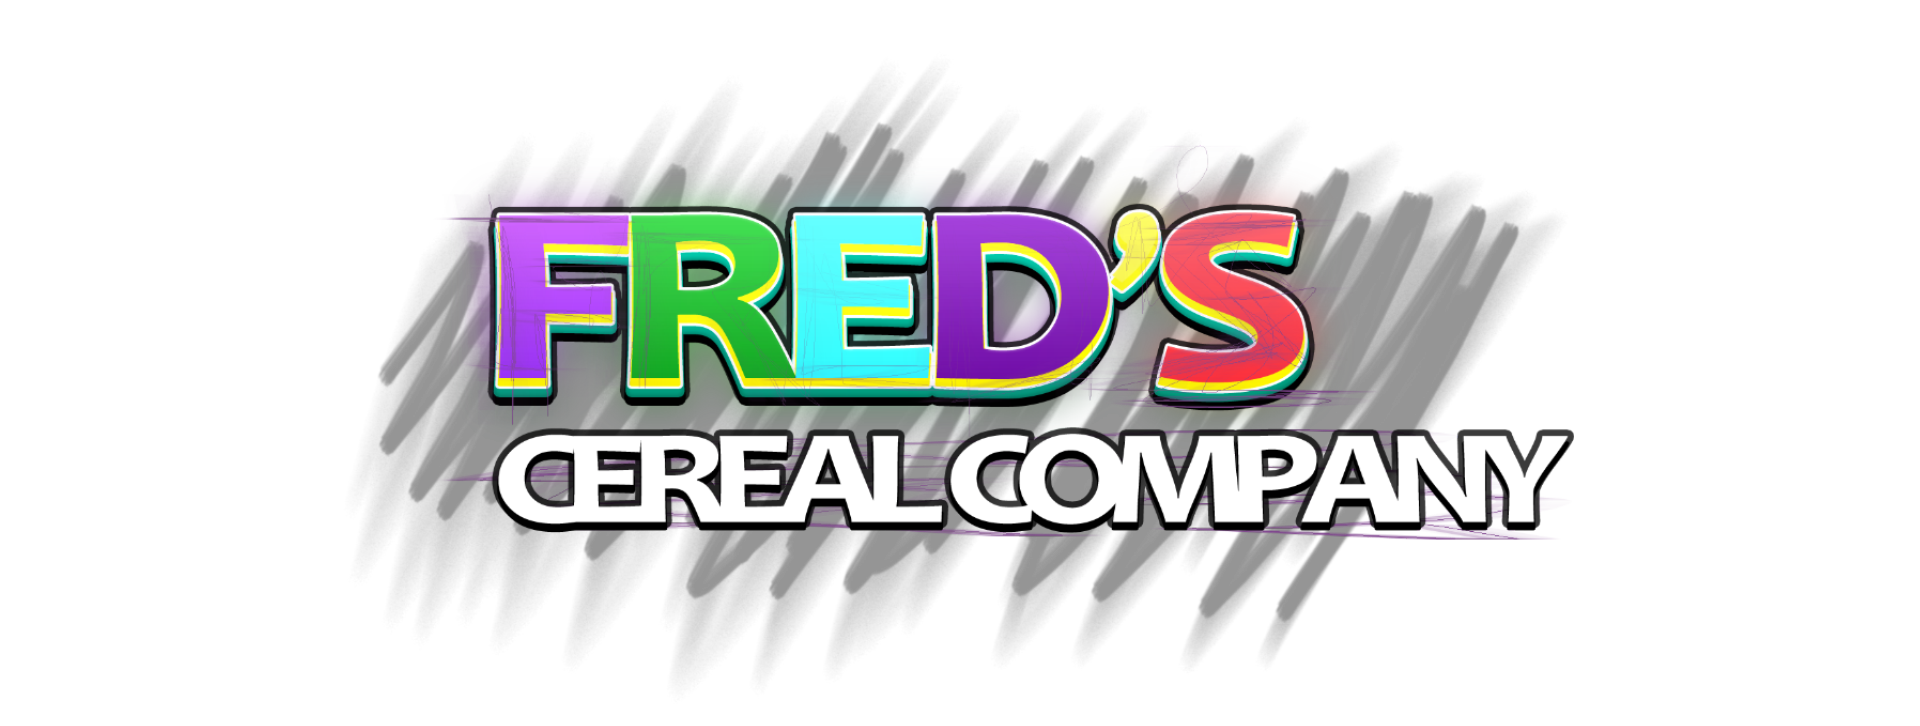 Fred's Cereal Company